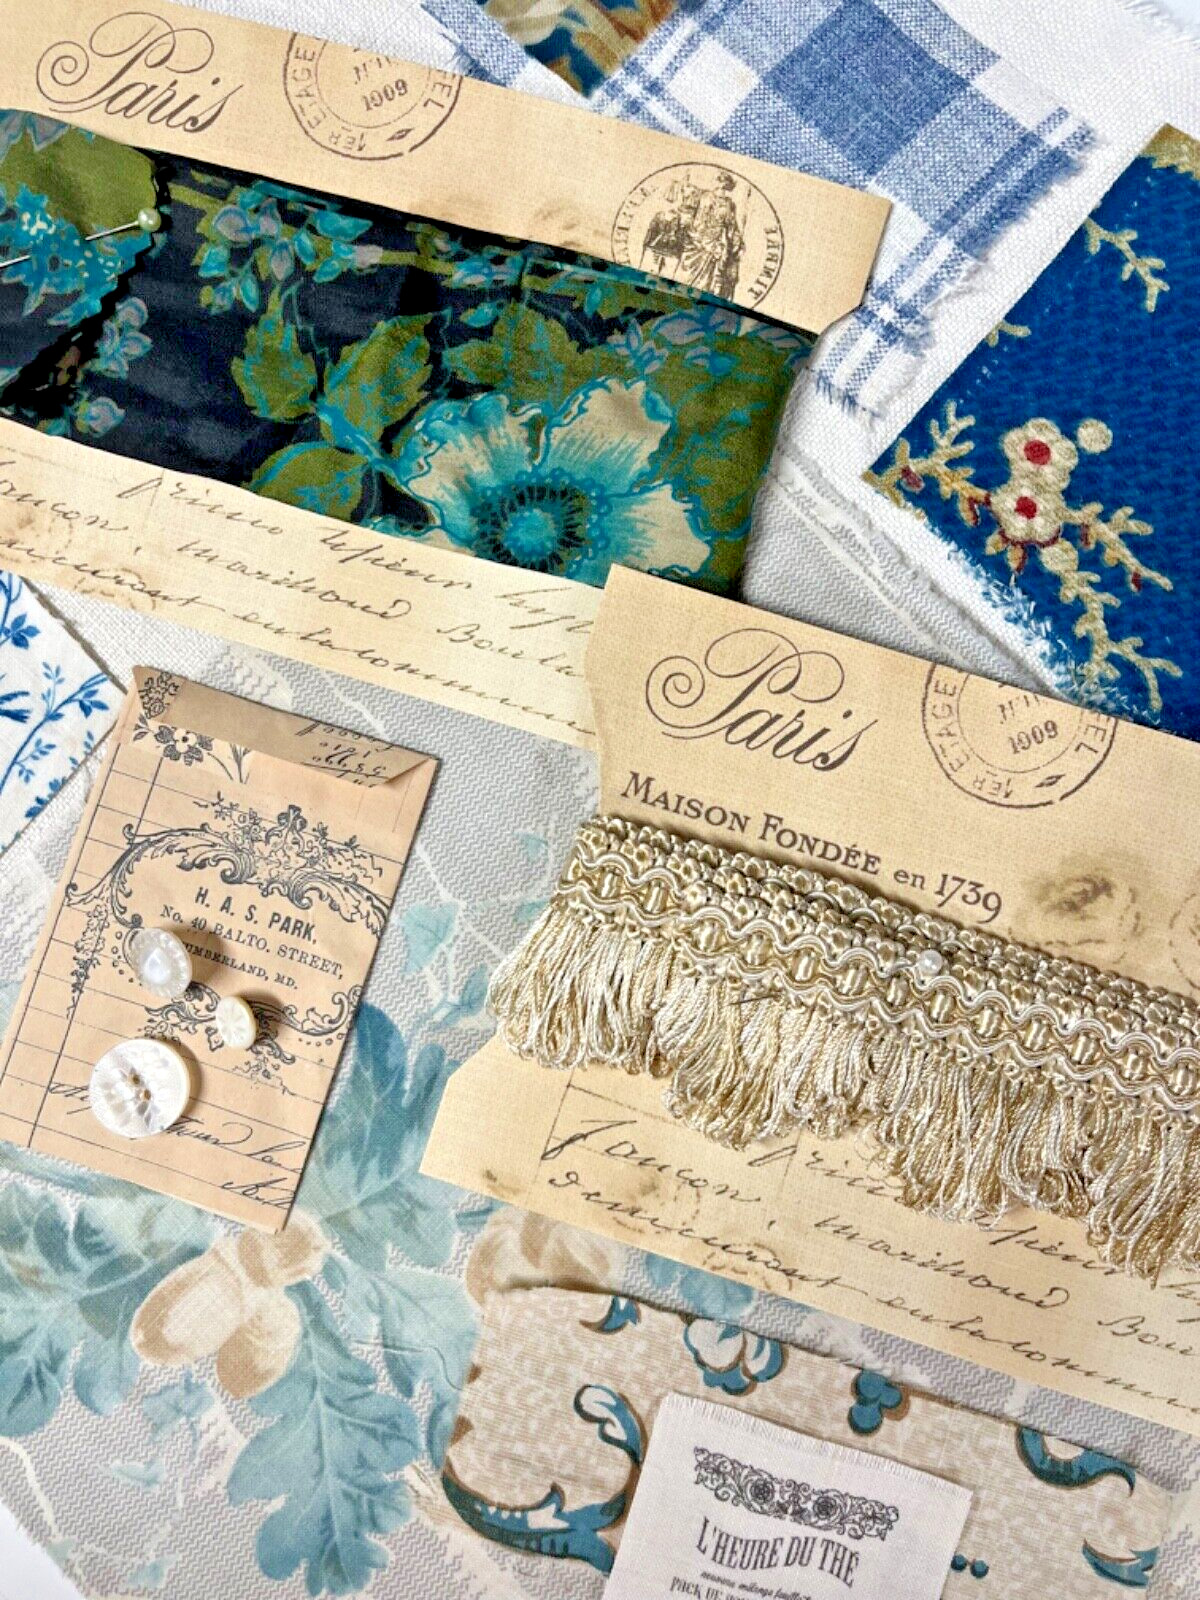 Antique & Vintage French Fabric & Lace Project Bundle STUNNING